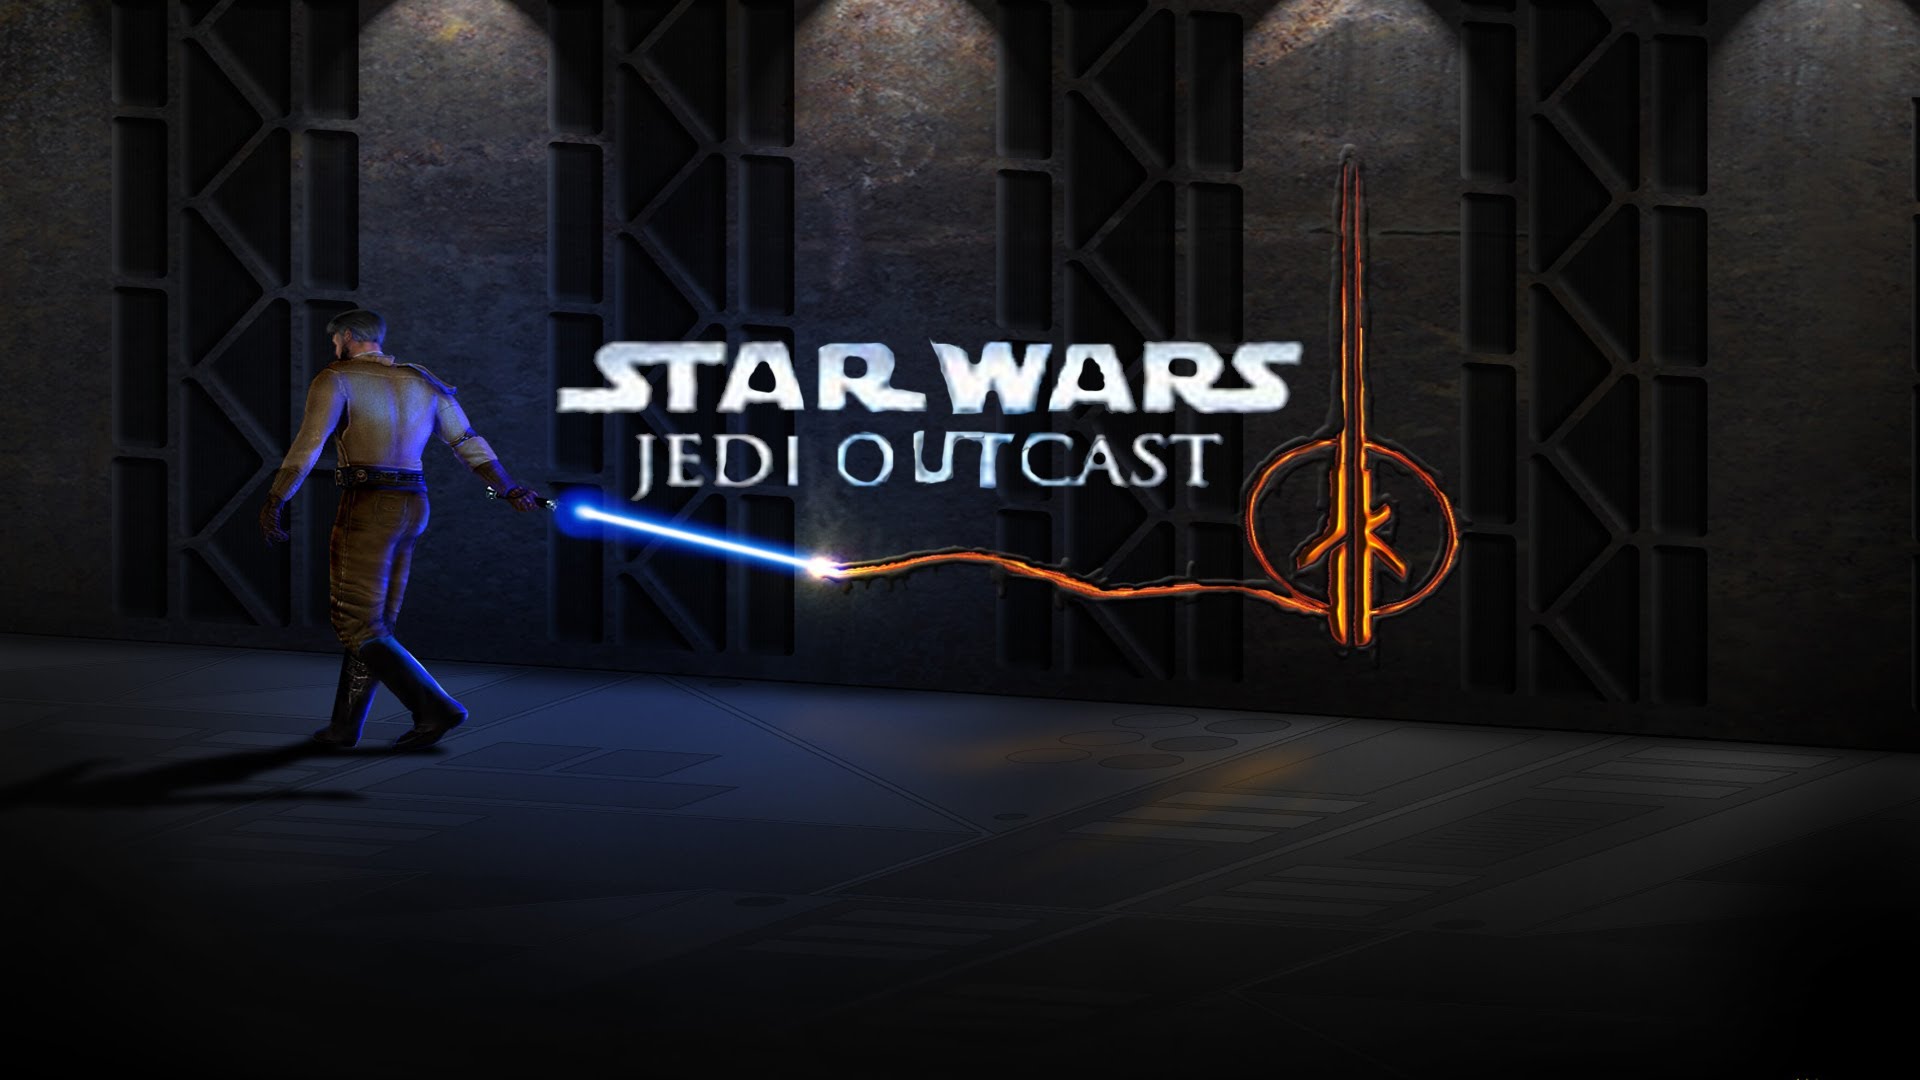 We finish with Star Wars Jedi Outcast, a game that made you feel like a Jedi in the time The Old Republic wasn't even a thought. If you find Jedi Outcast to your liking you might be happy it is a part of a series that never seen Mickey Mouse.